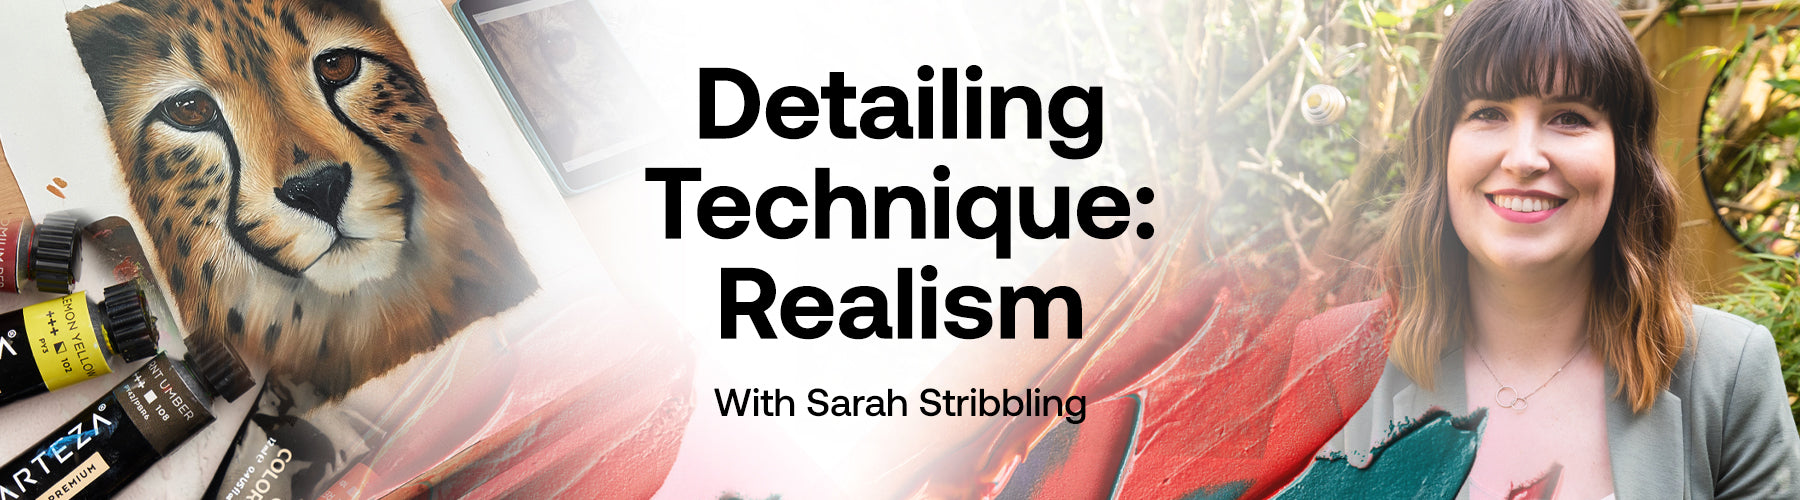 Detailing Technique: Realism with Sarah Stribbling